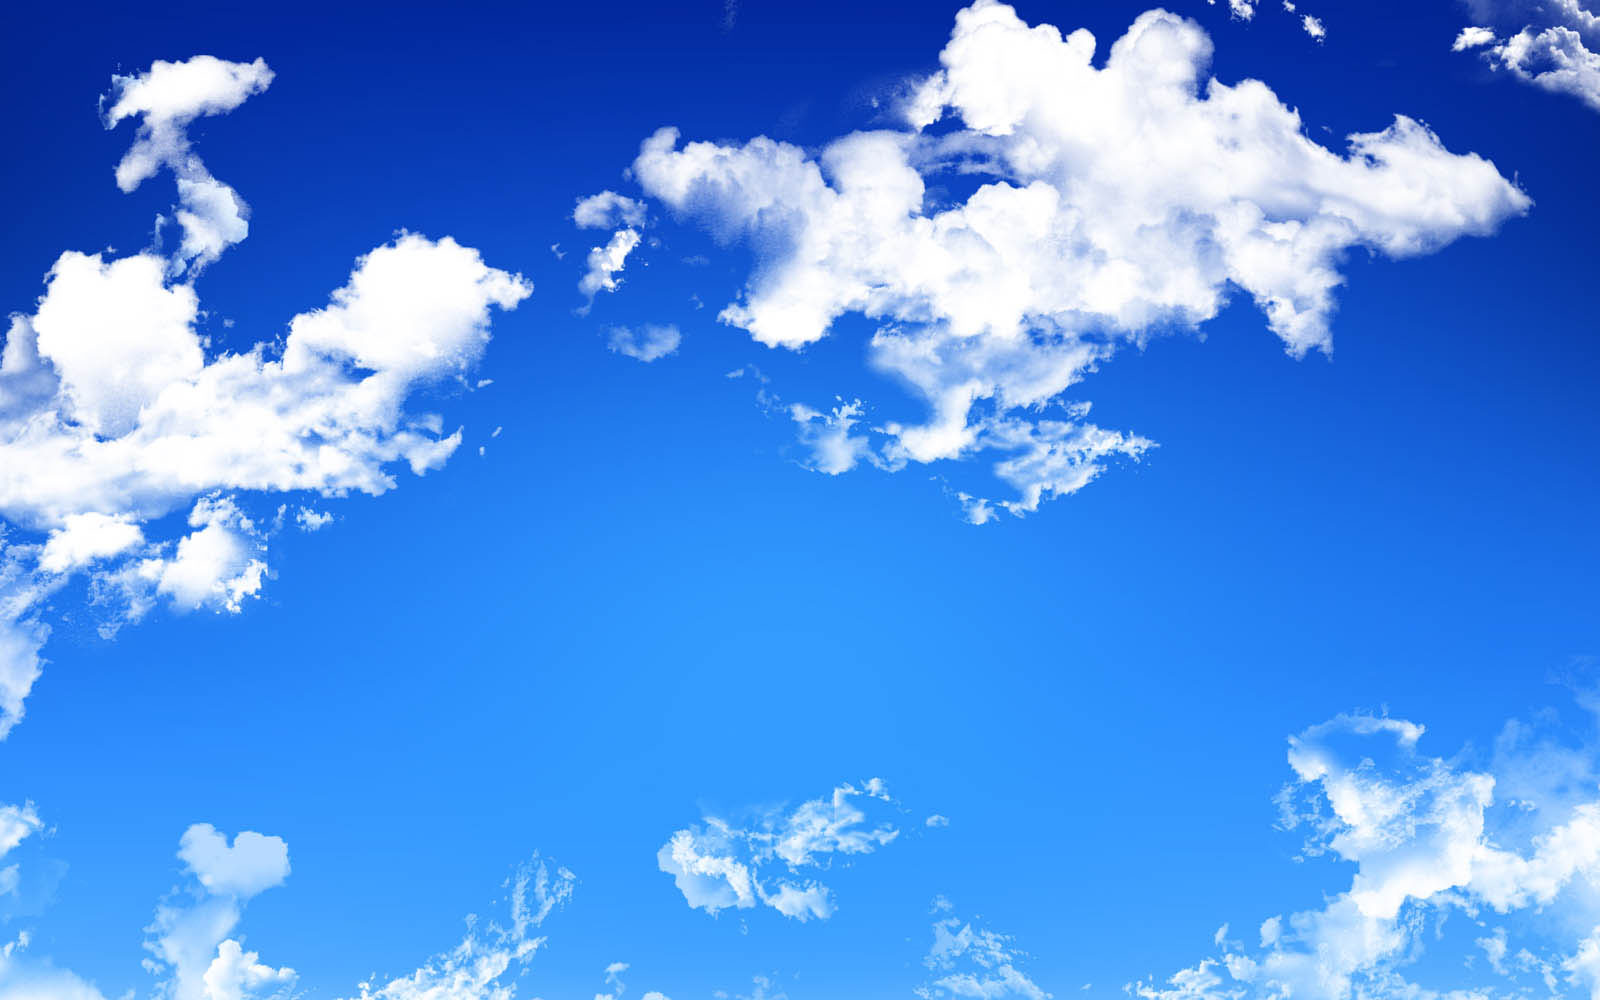 80 Sky wallpapers HD  Download Free backgrounds